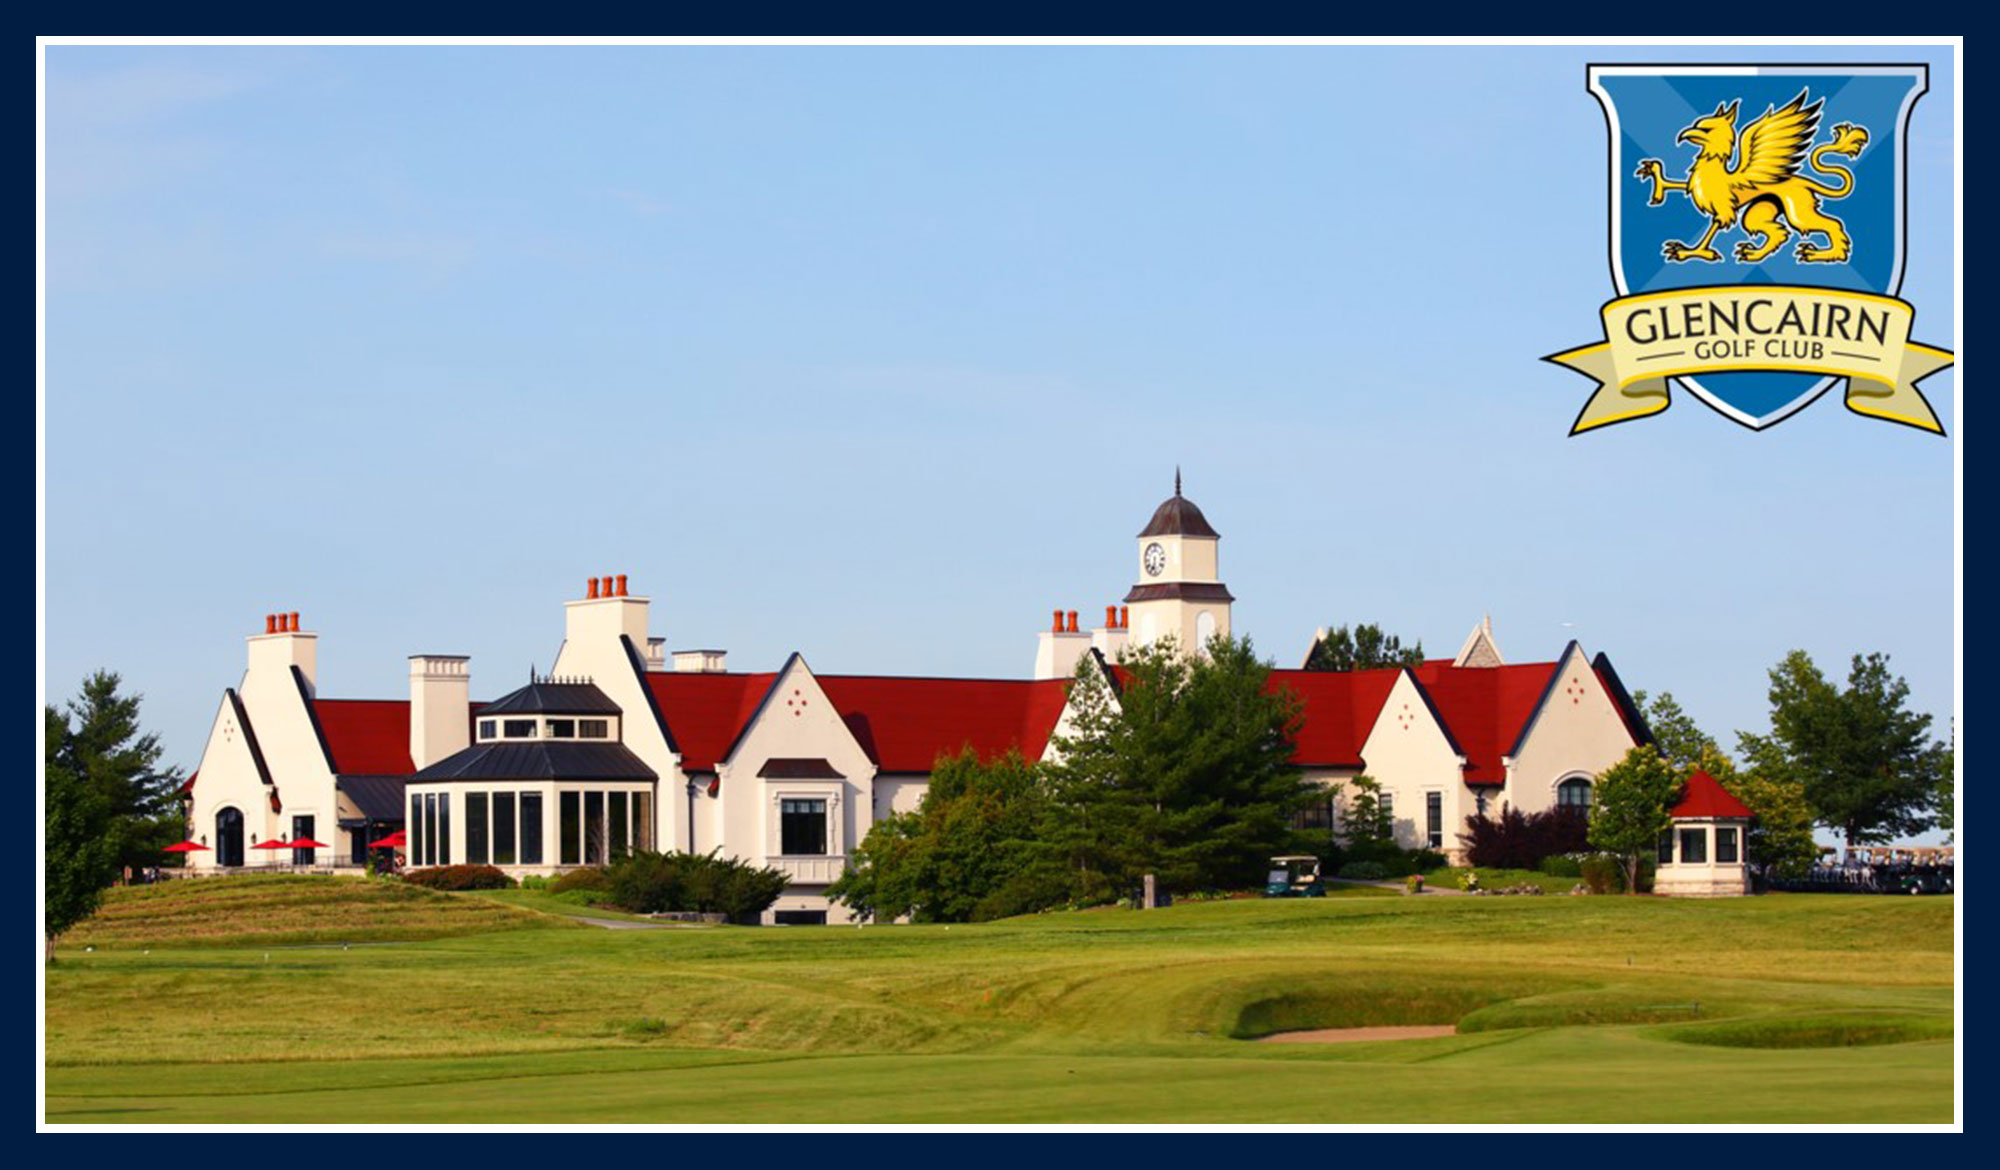 Image of the Glencairn clubhouse with the course logo